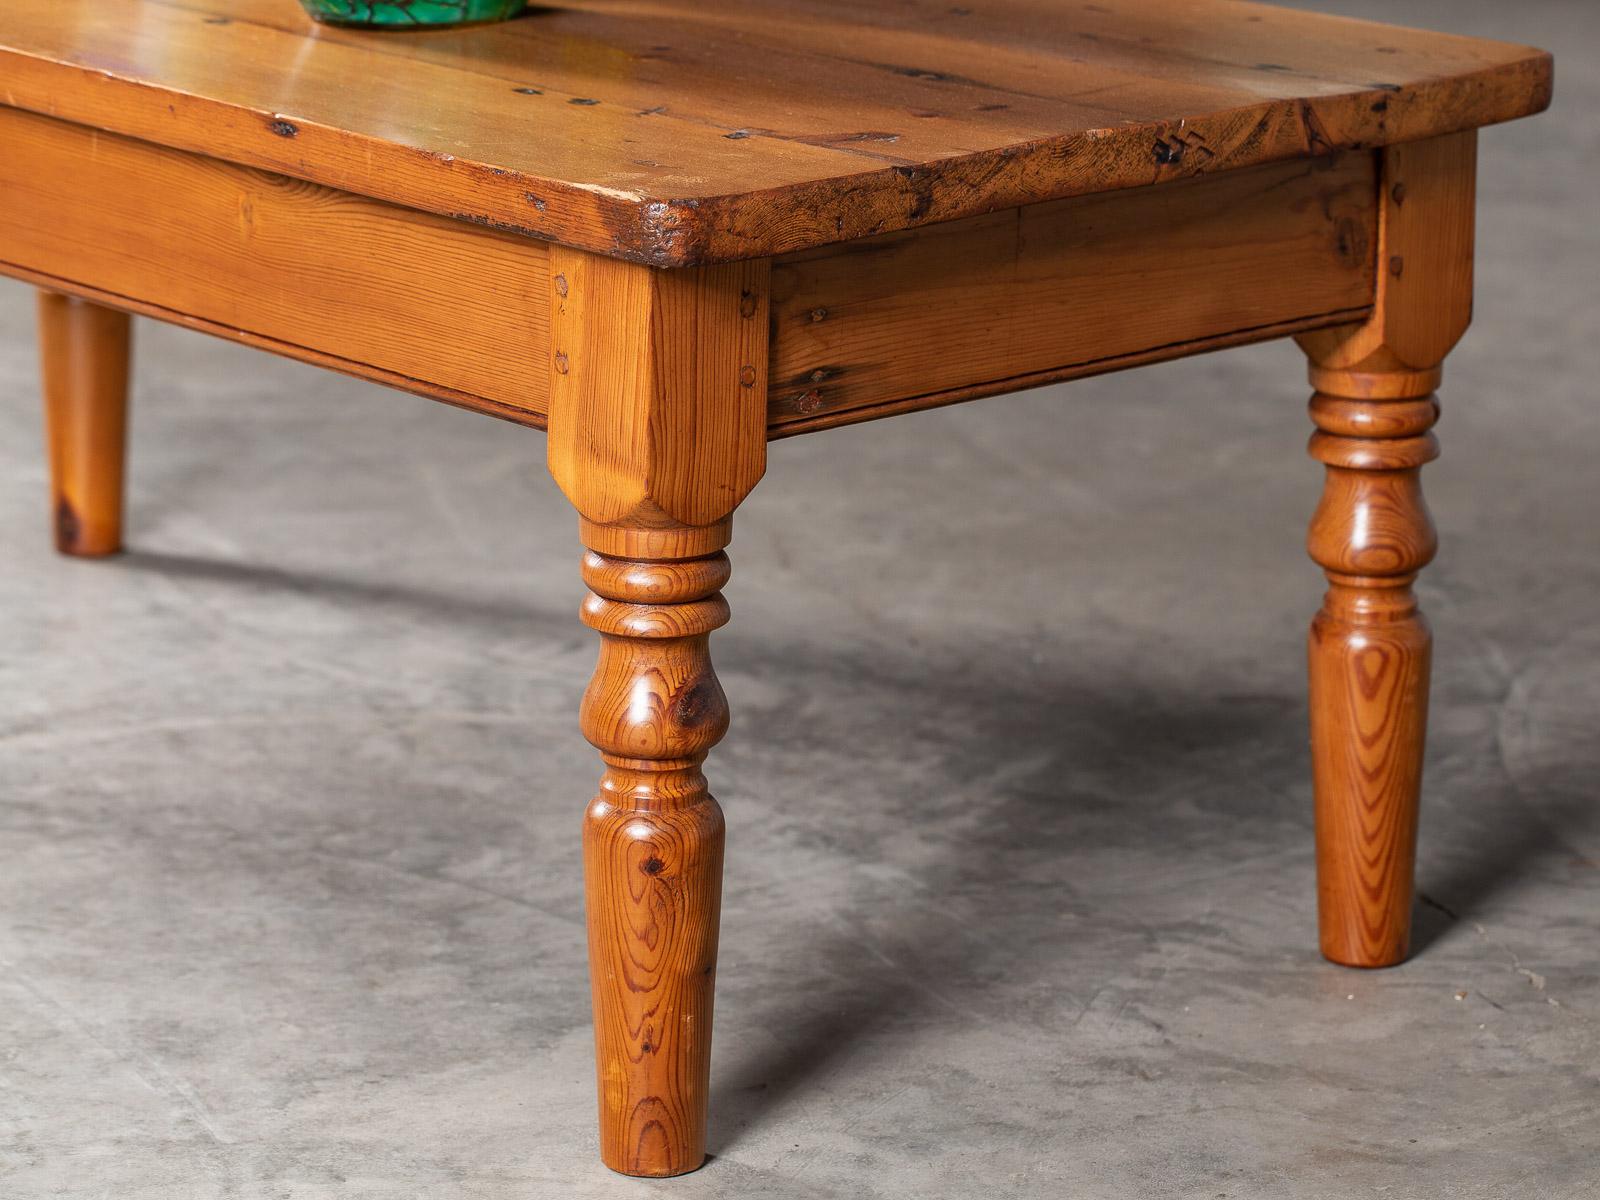 Antique English Pine Coffee Table Turned Legs, circa 1875 For Sale 2